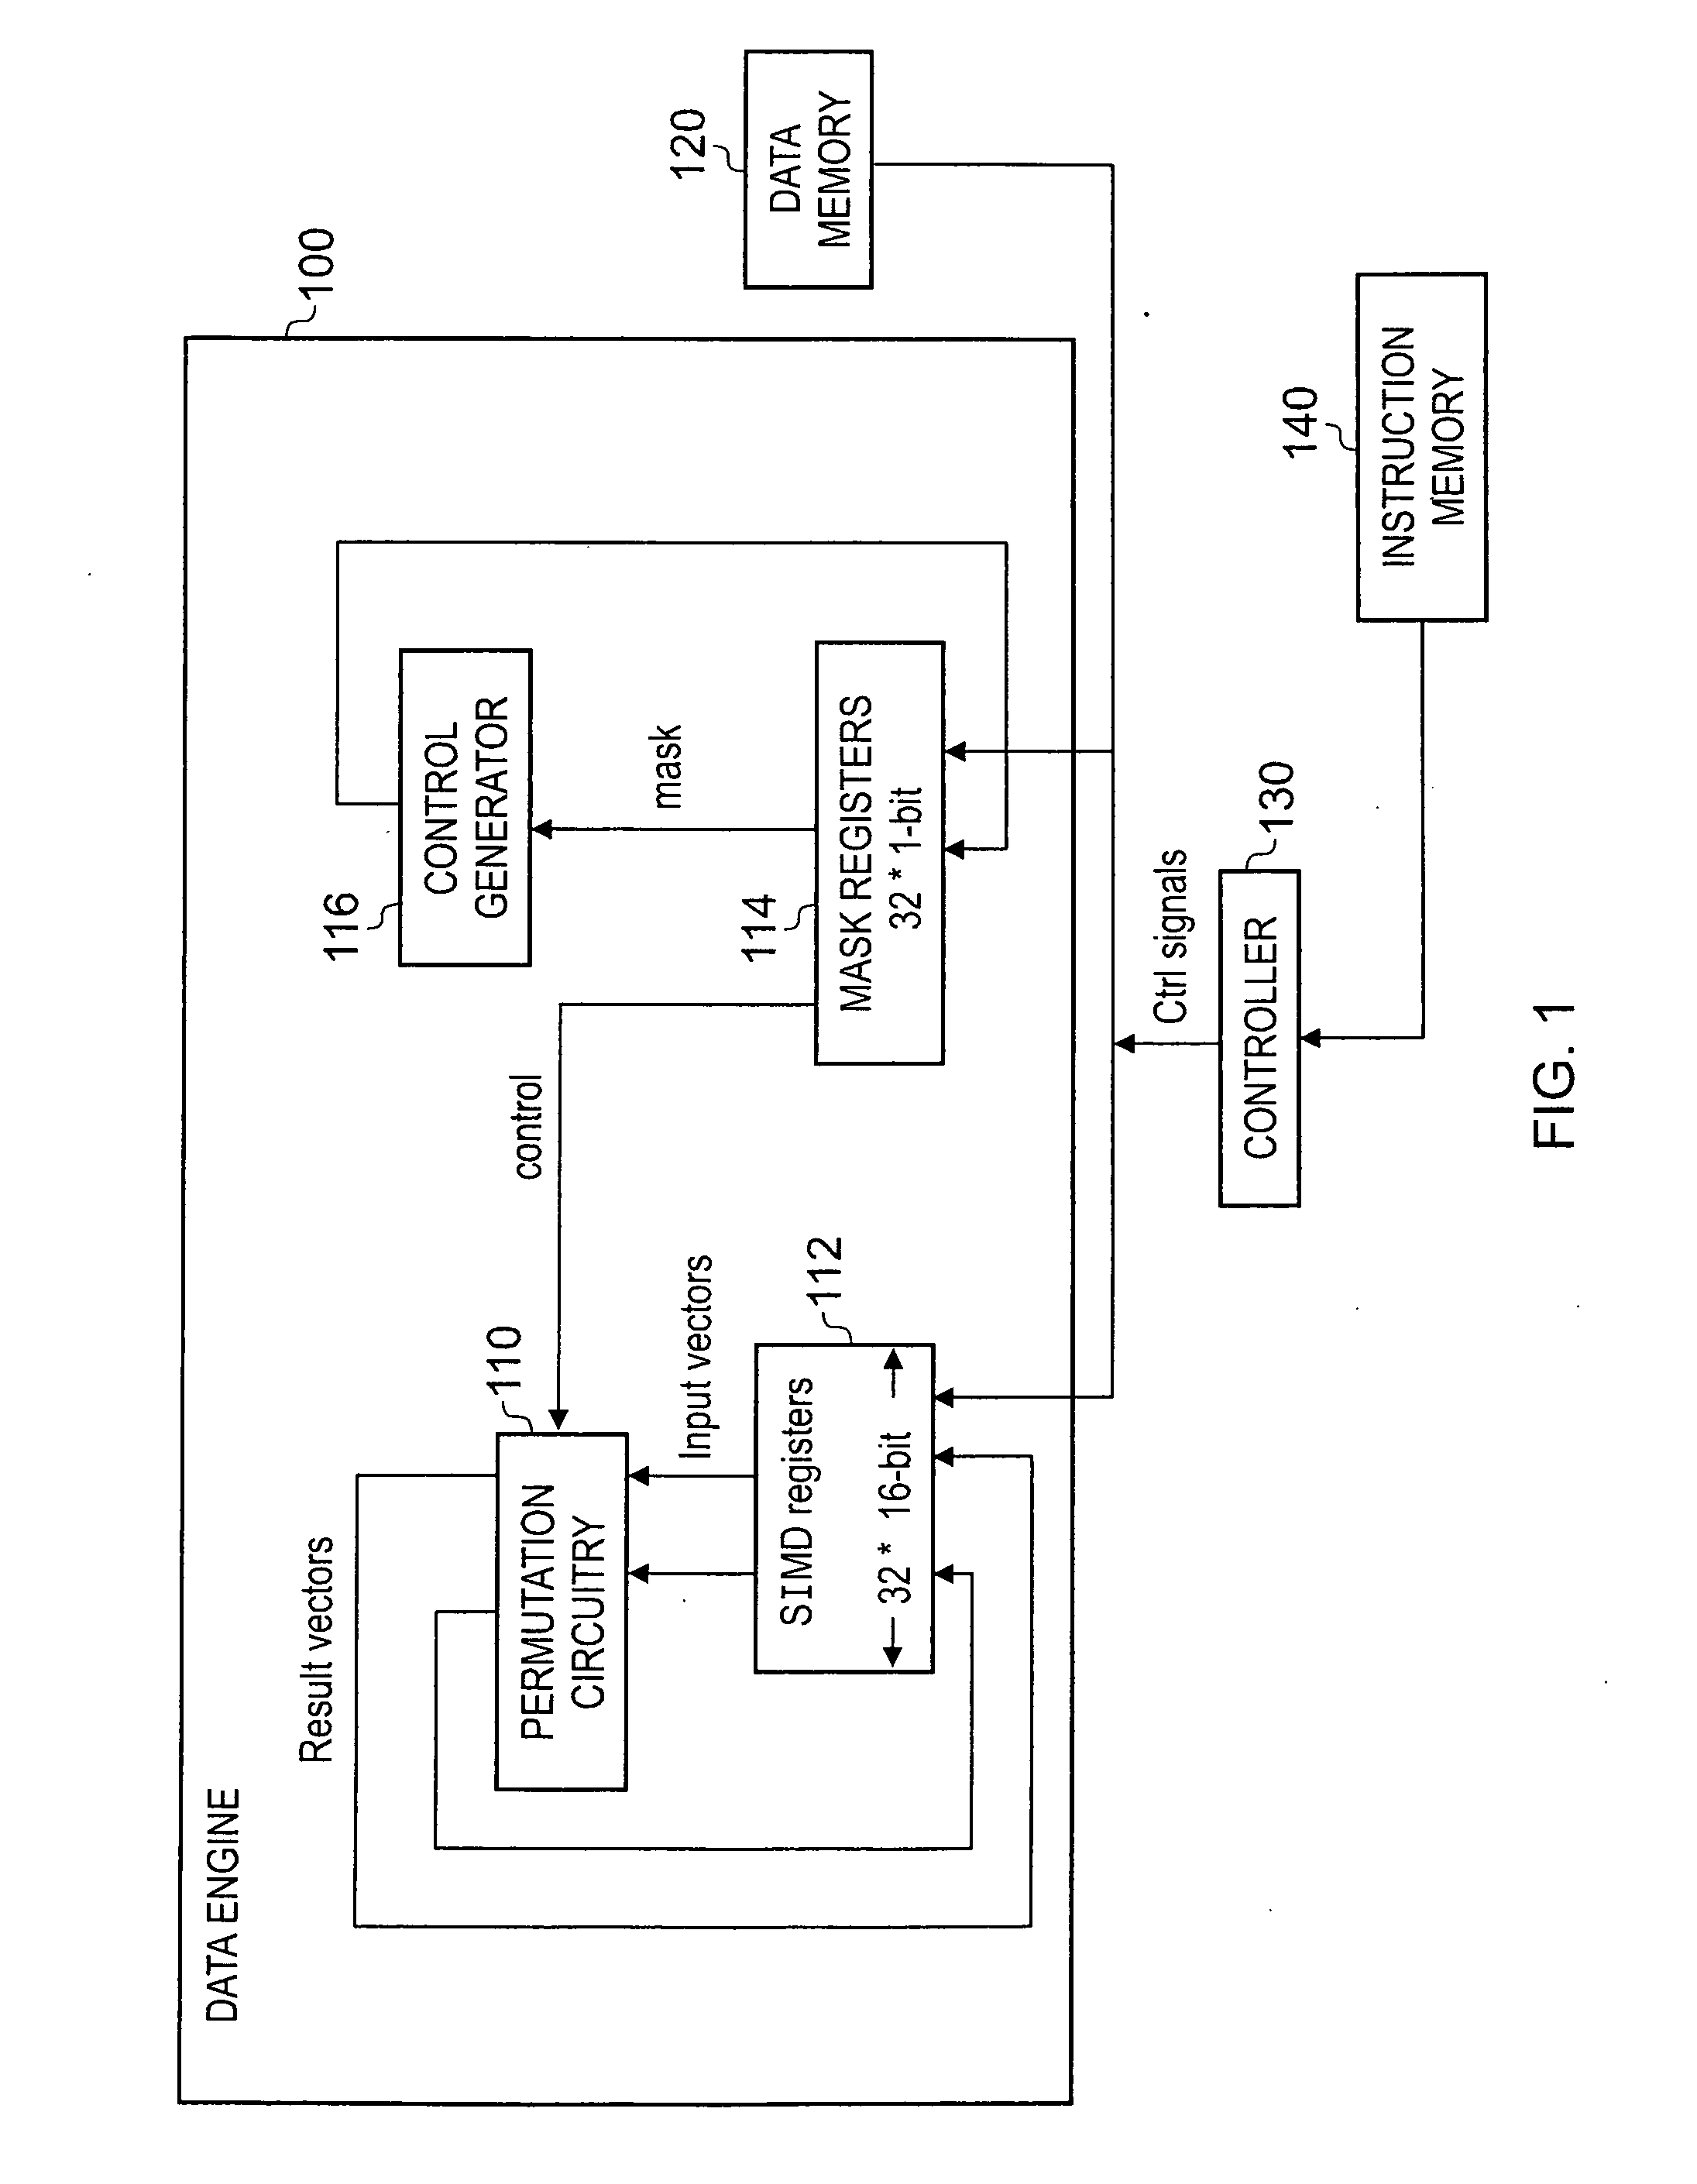 Apparatus and method for performing permutation operations on data